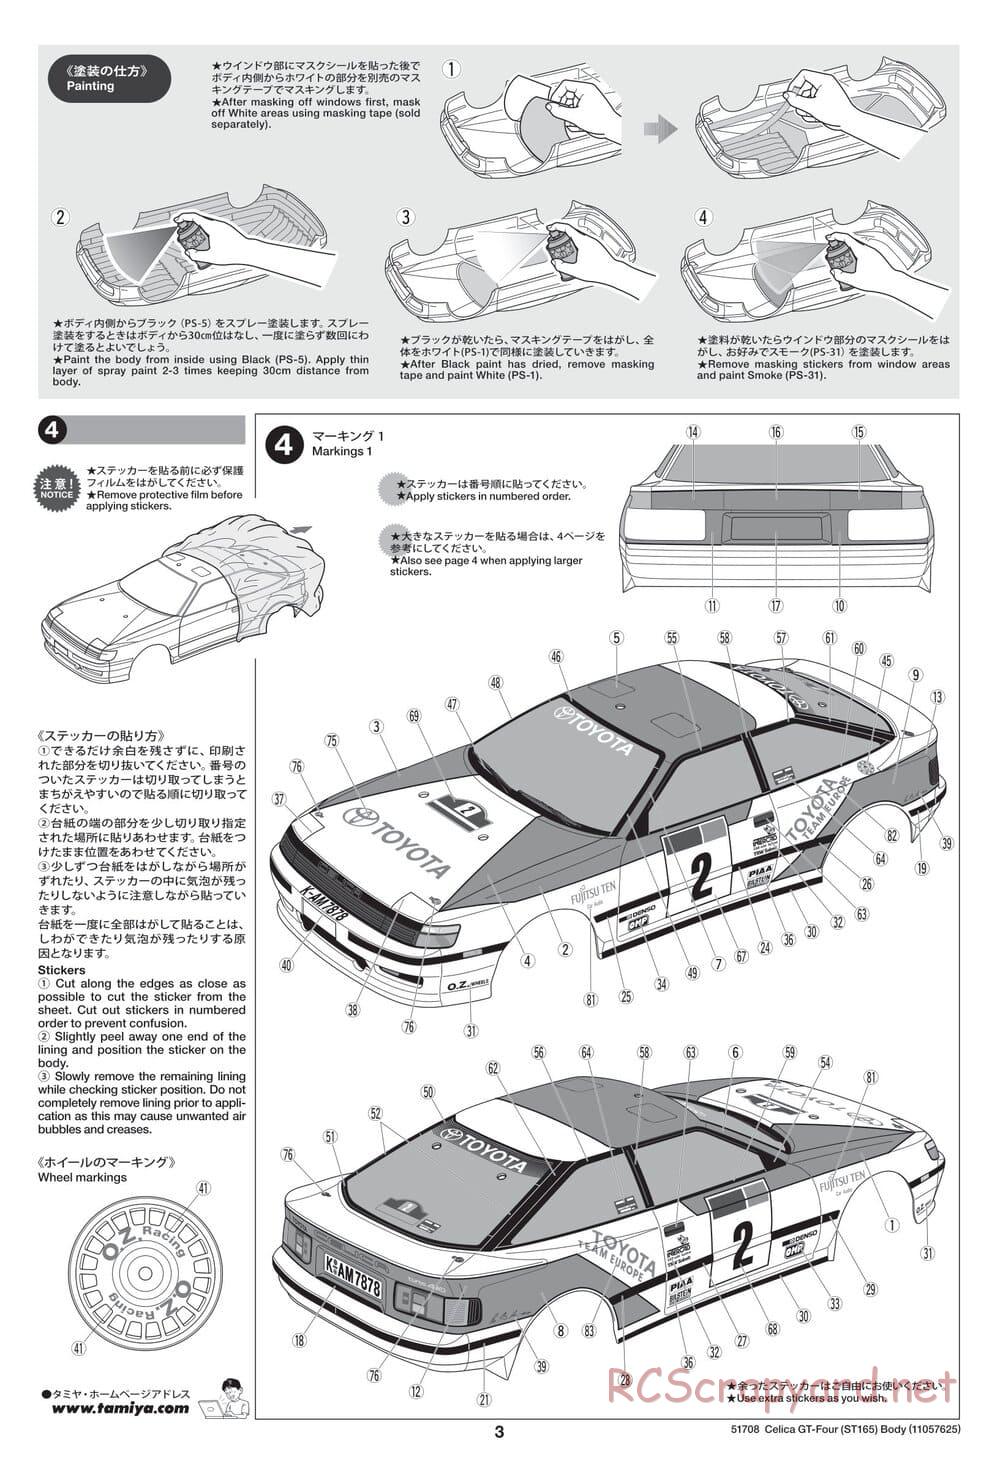 Tamiya - Toyota Celica GT-Four (ST165) - TT-02 Chassis - Body Manual - Page 3